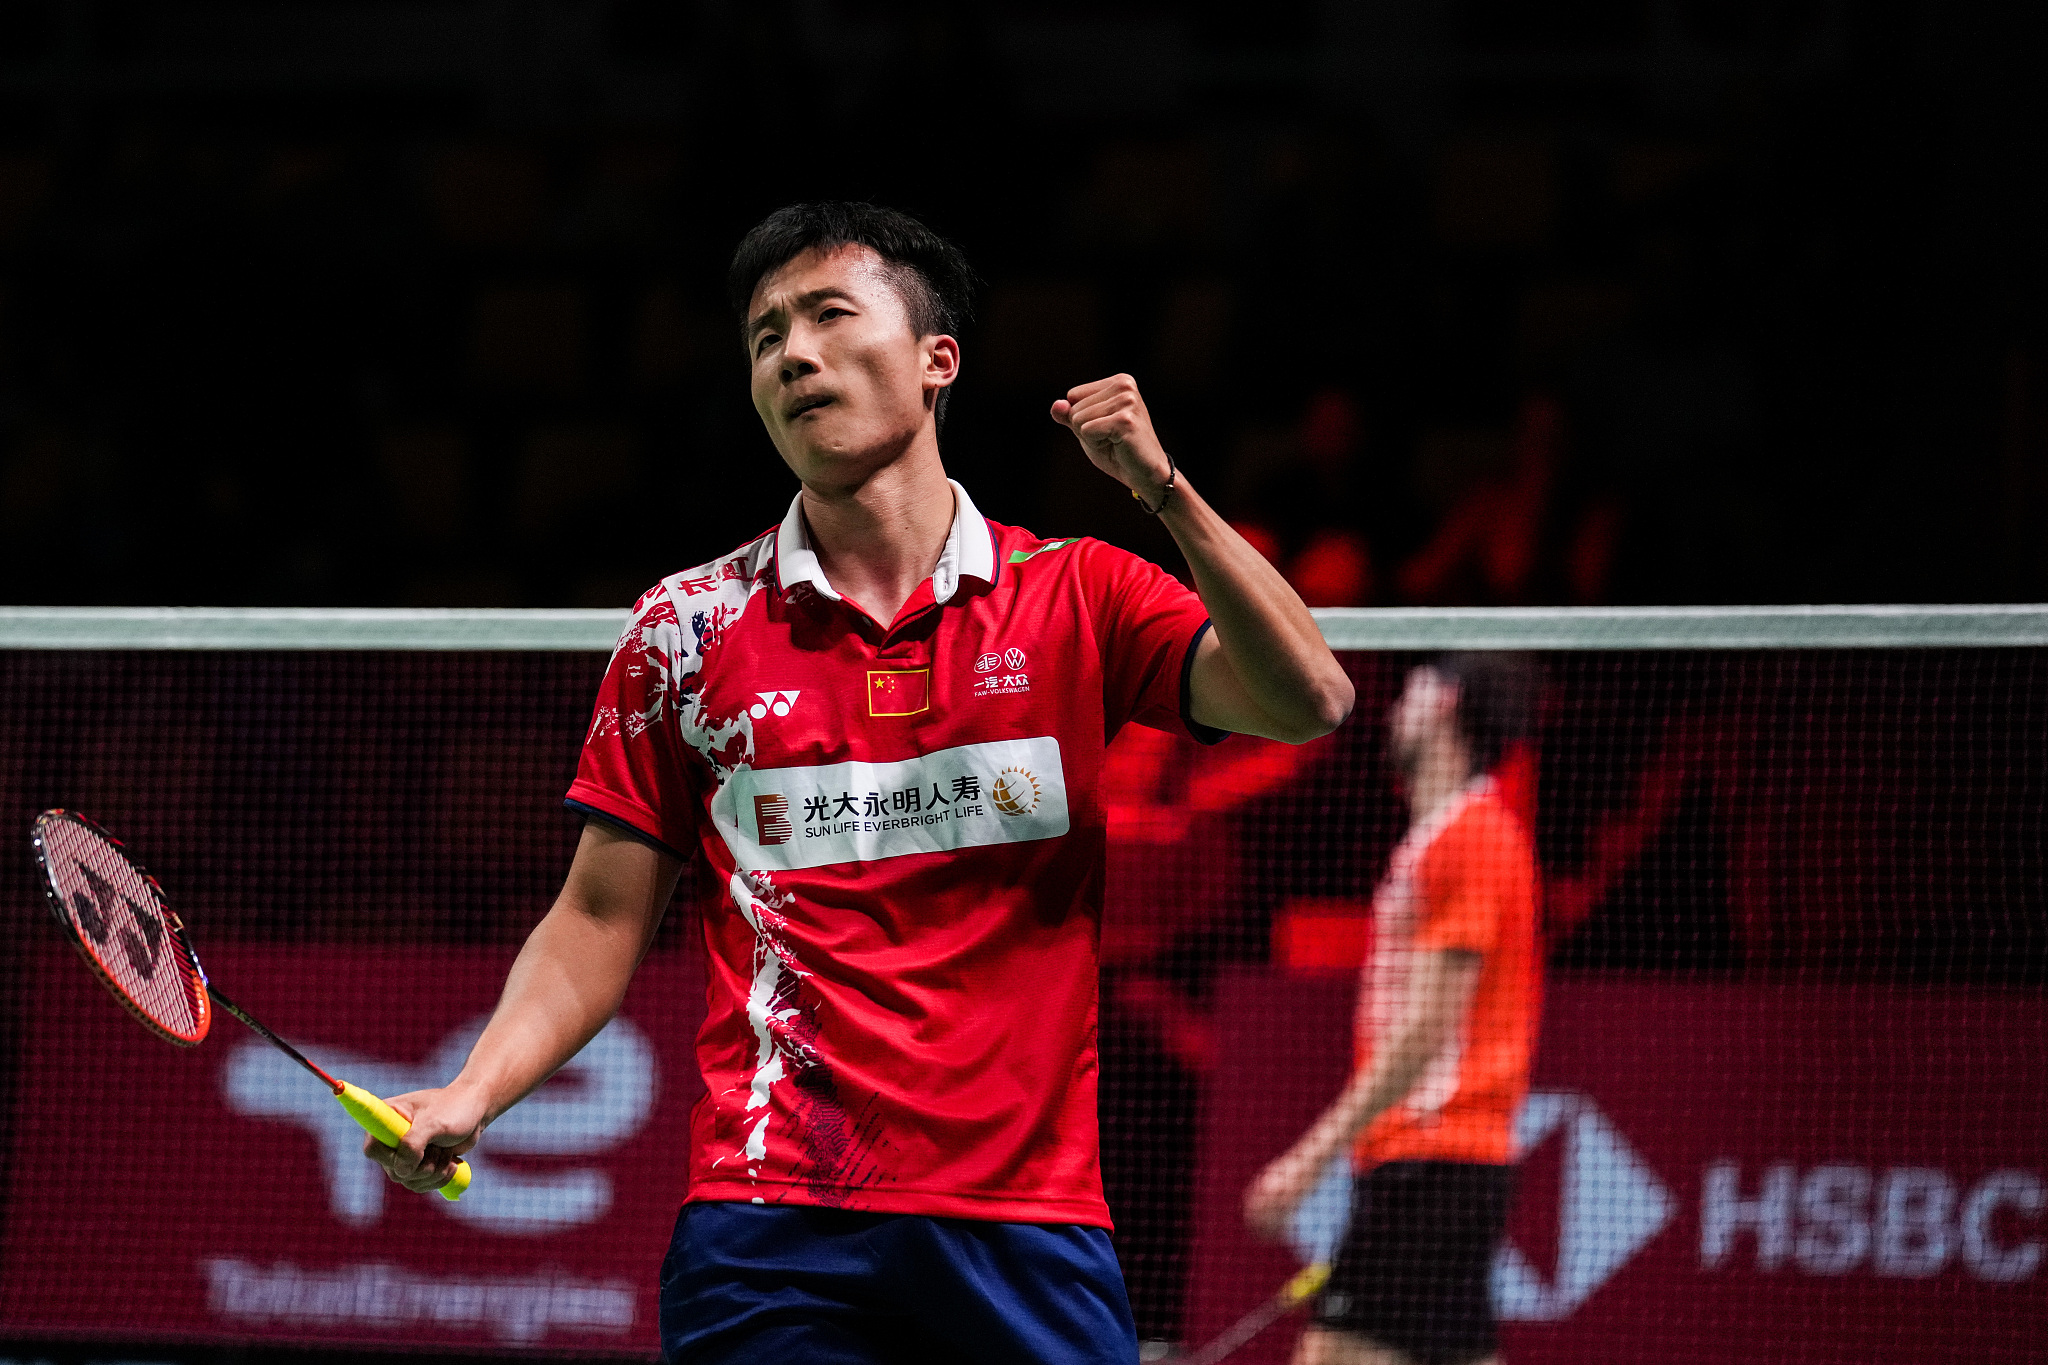 Thomas and uber cup 2021 results